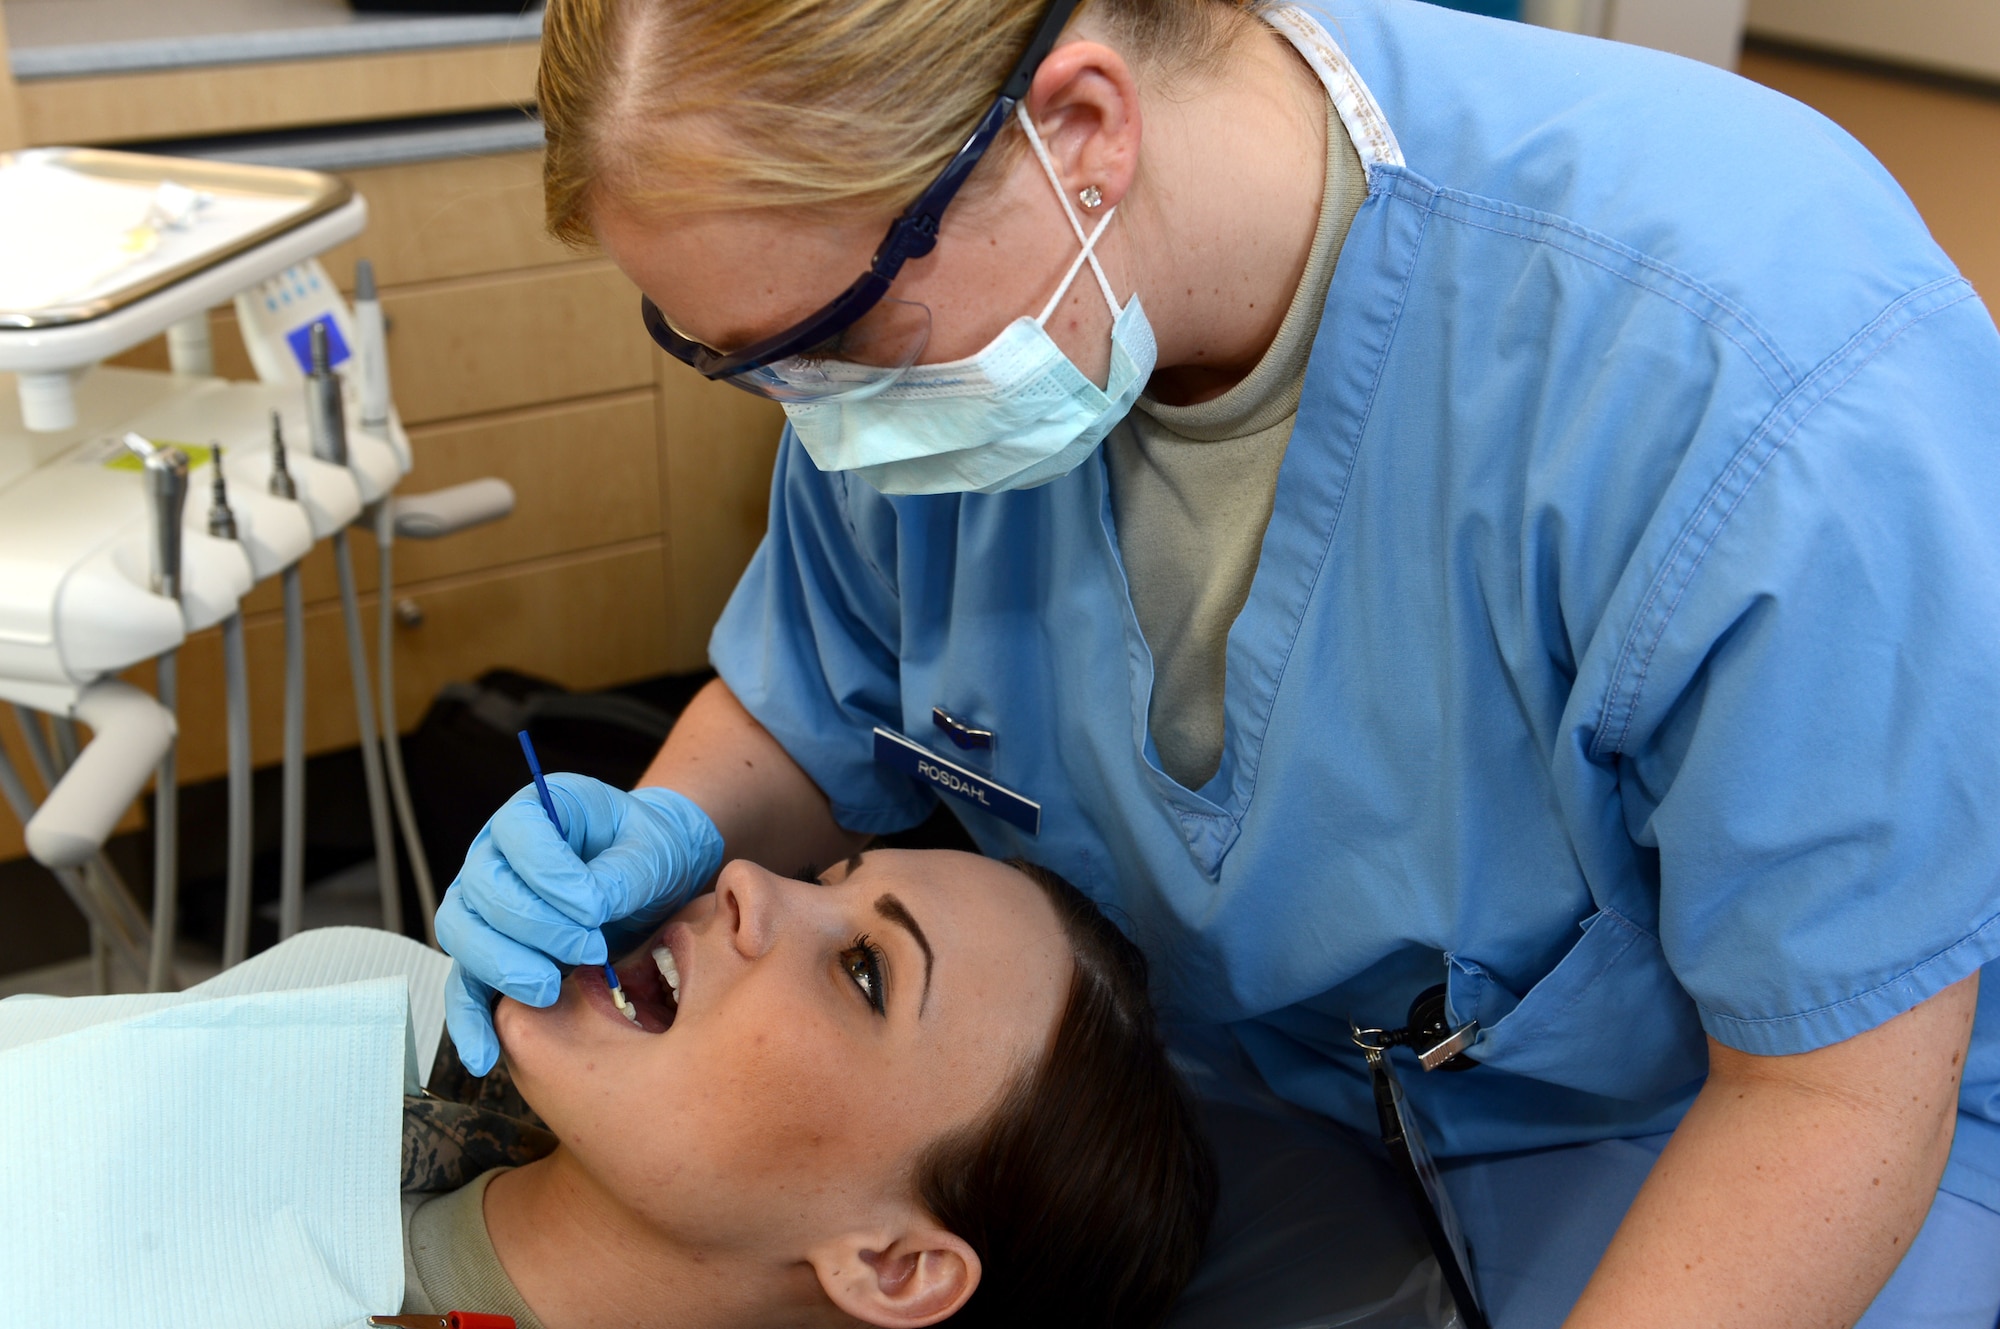 U.S. Air Force Airman 1st Class Alicia Rosdahl, 52nd Dental Squadron dental technician from Greenville, N.C., paints a fluoride treatment on the teeth of U.S. Air Force Senior Airman Victoria Perrone, 52nd DS dental technician from Chandler, Ariz., at Spangdahlem Air Base, Germany, March 28, 2014. Fluoride is used to help prevent tooth decay by protecting the teeth from bacteria in plaque. (U.S. Air Force photo by Airman 1st Class Kyle Gese/Released)